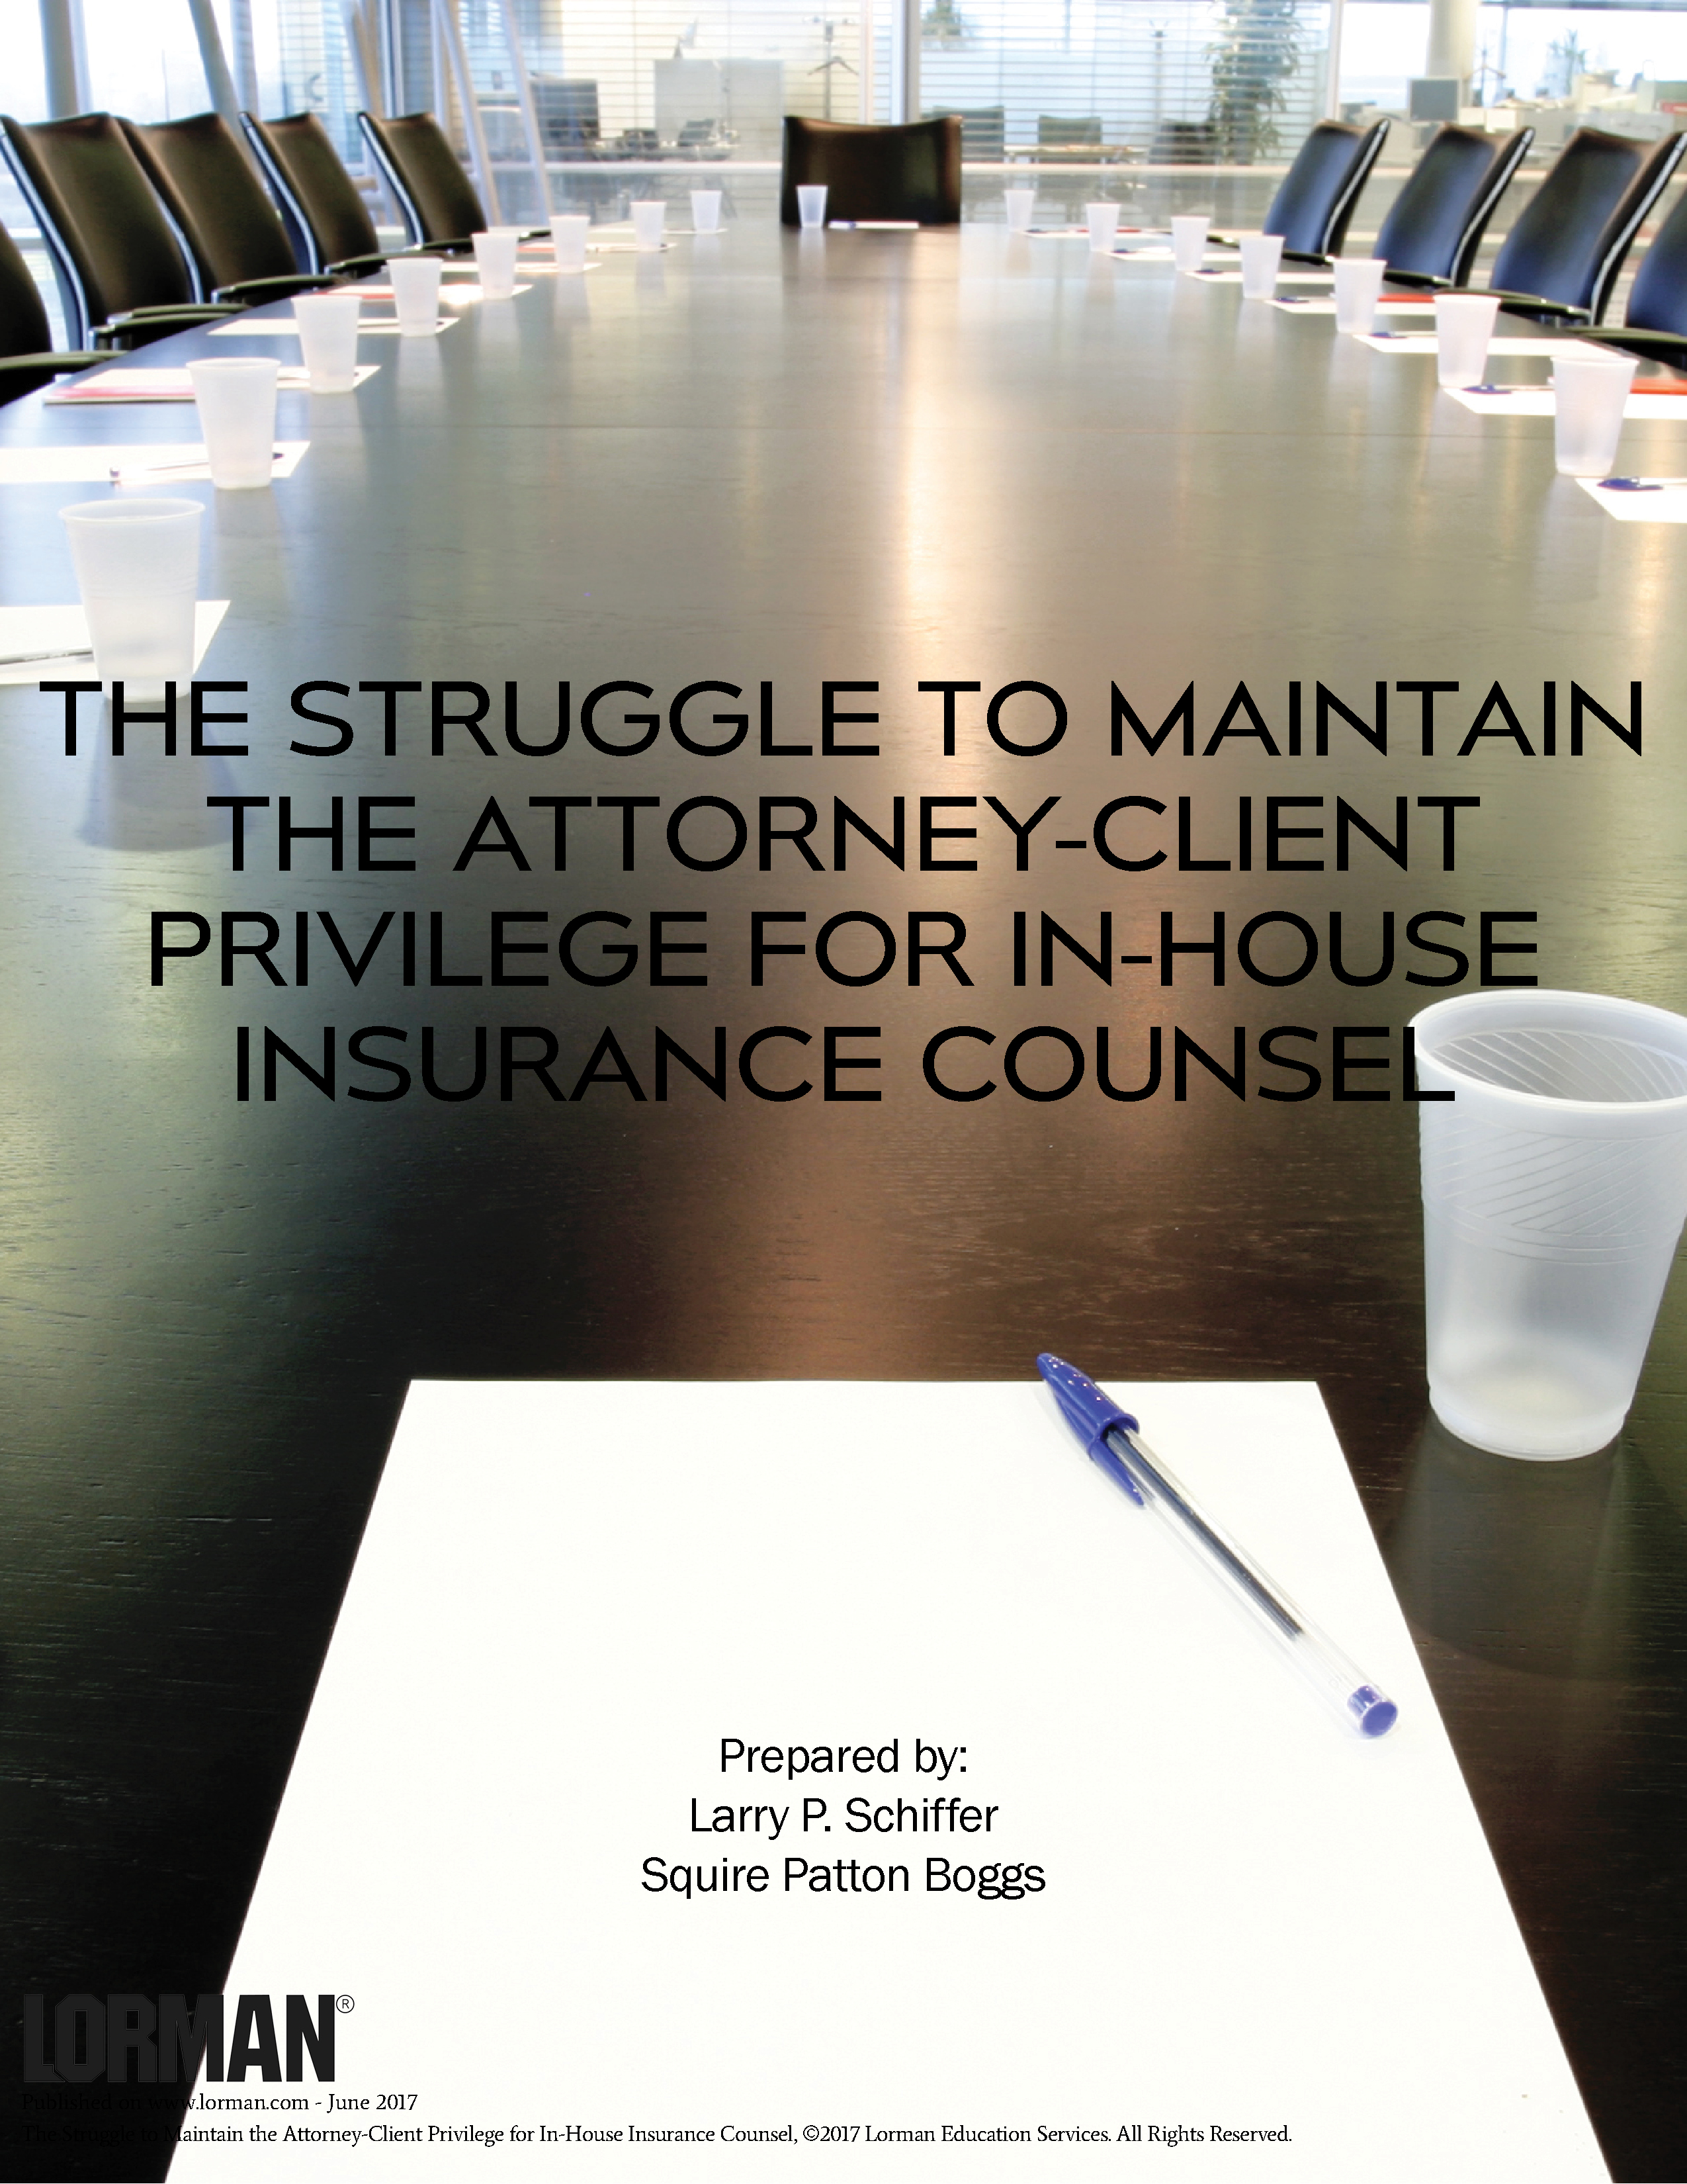 The Struggle to Maintain the Attorney-Client Privilege for In-House Insurance Counsel 